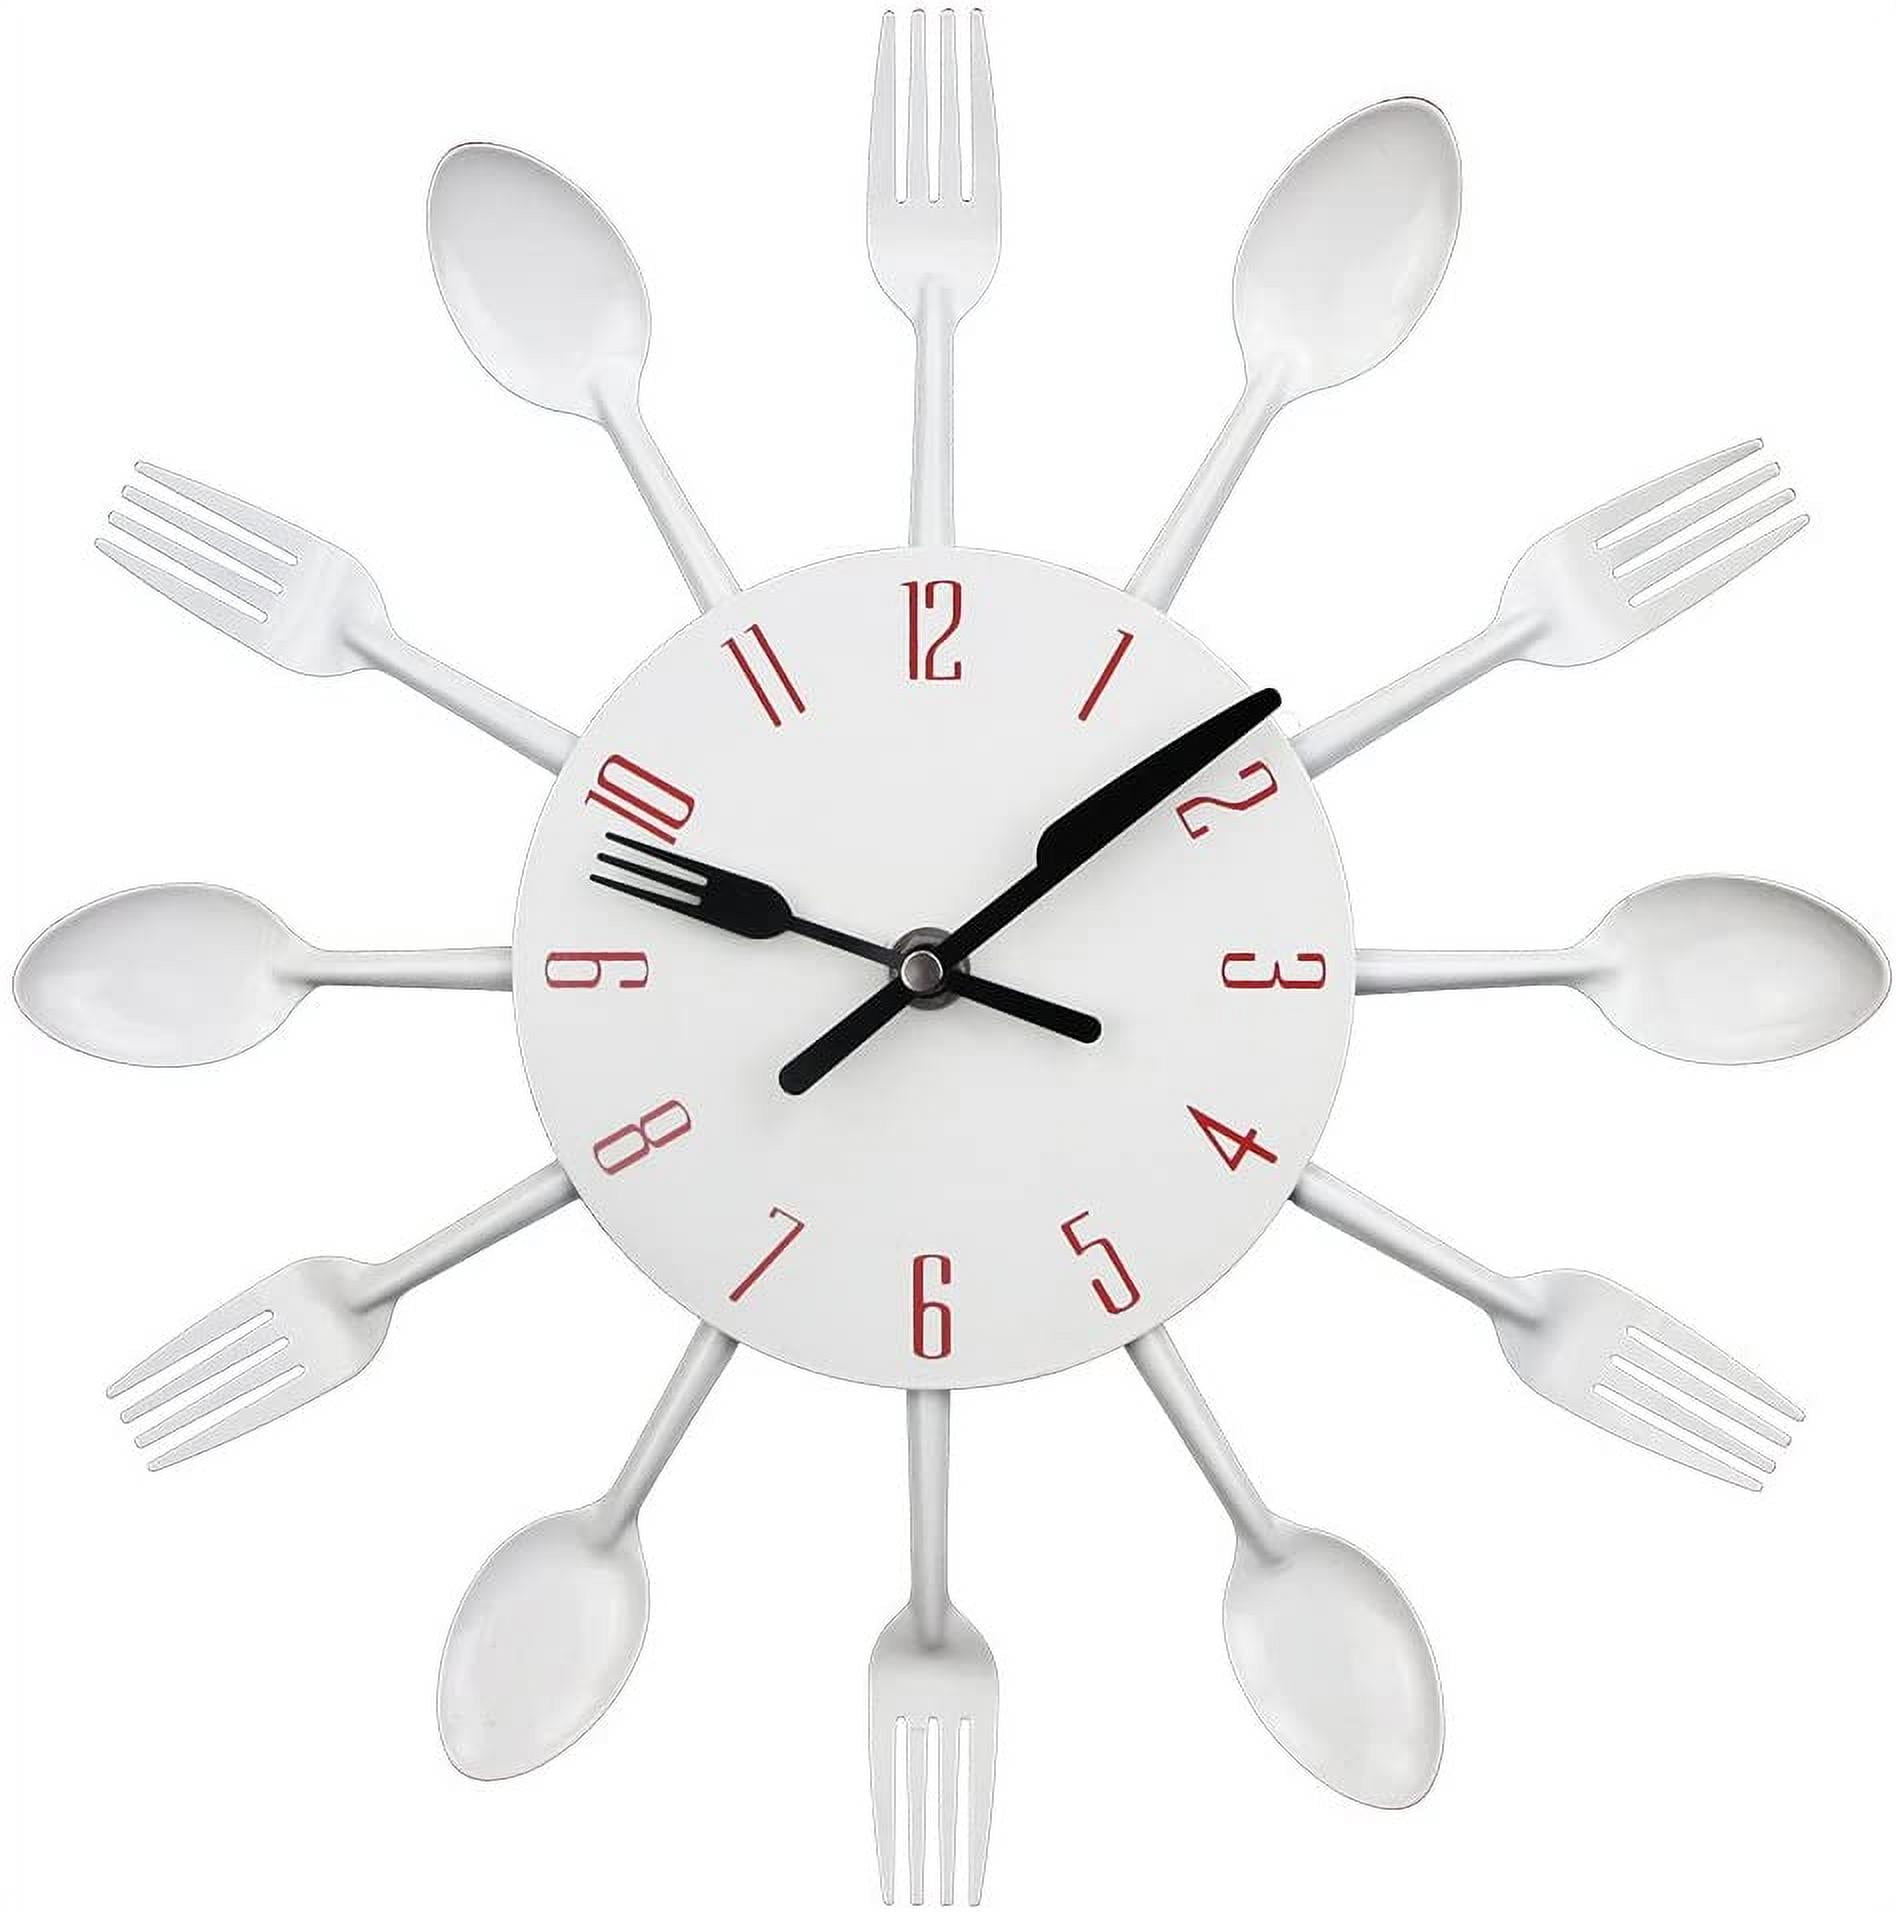 Kitchen Wall Clock Spoon Fork Wall Wall Sticker Room Home Decoration 